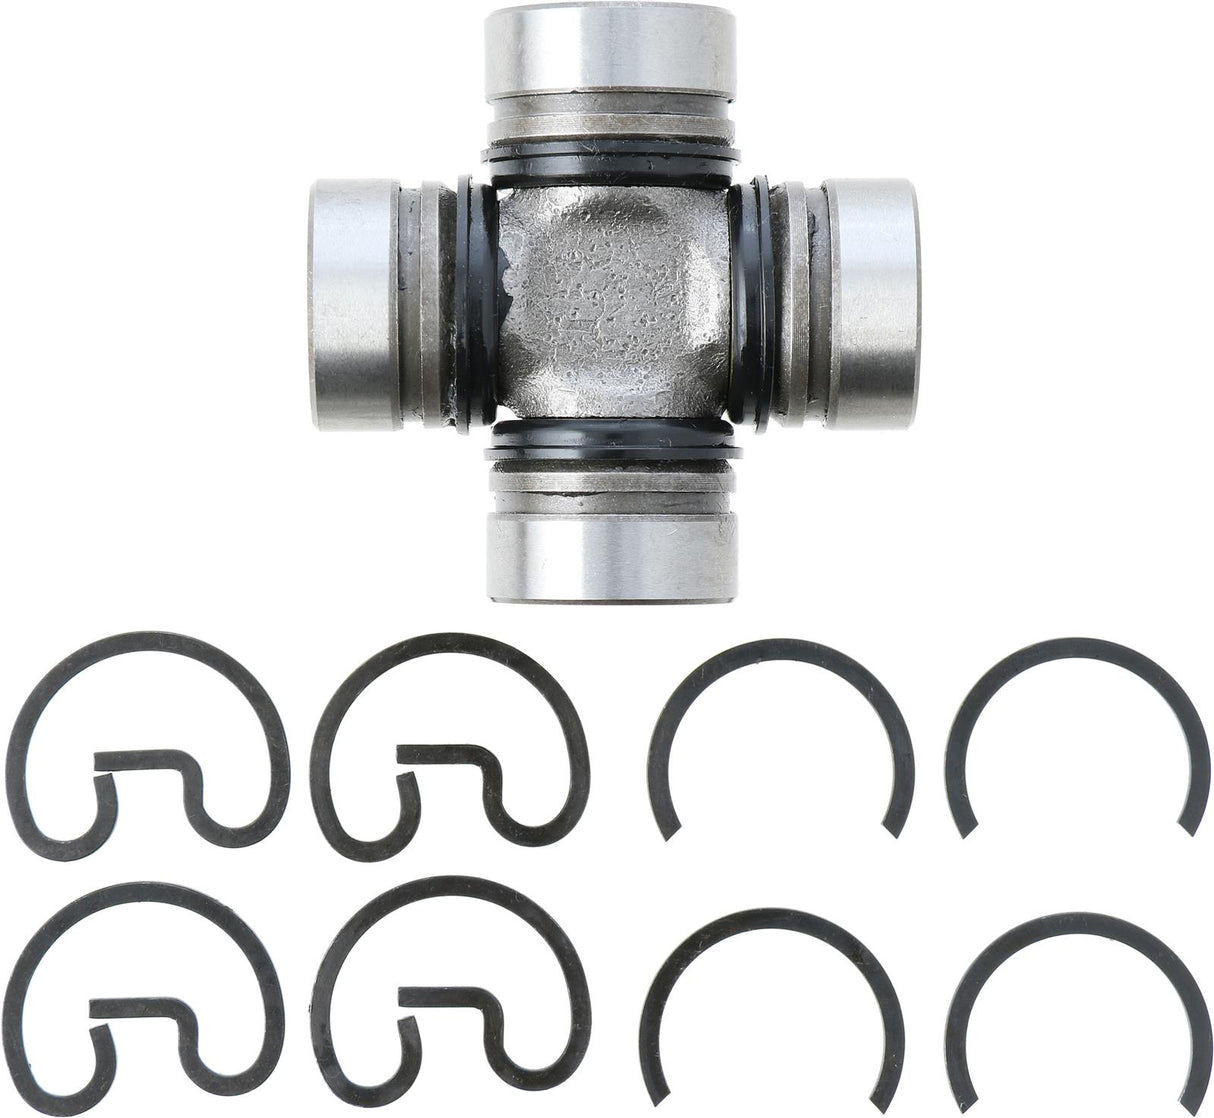 DANA - SPICER HEAVY AXLE ­-­ 25-3215X ­-­ UNIVERSAL JOINT NON GREASEABLE 1210WJ SERIES